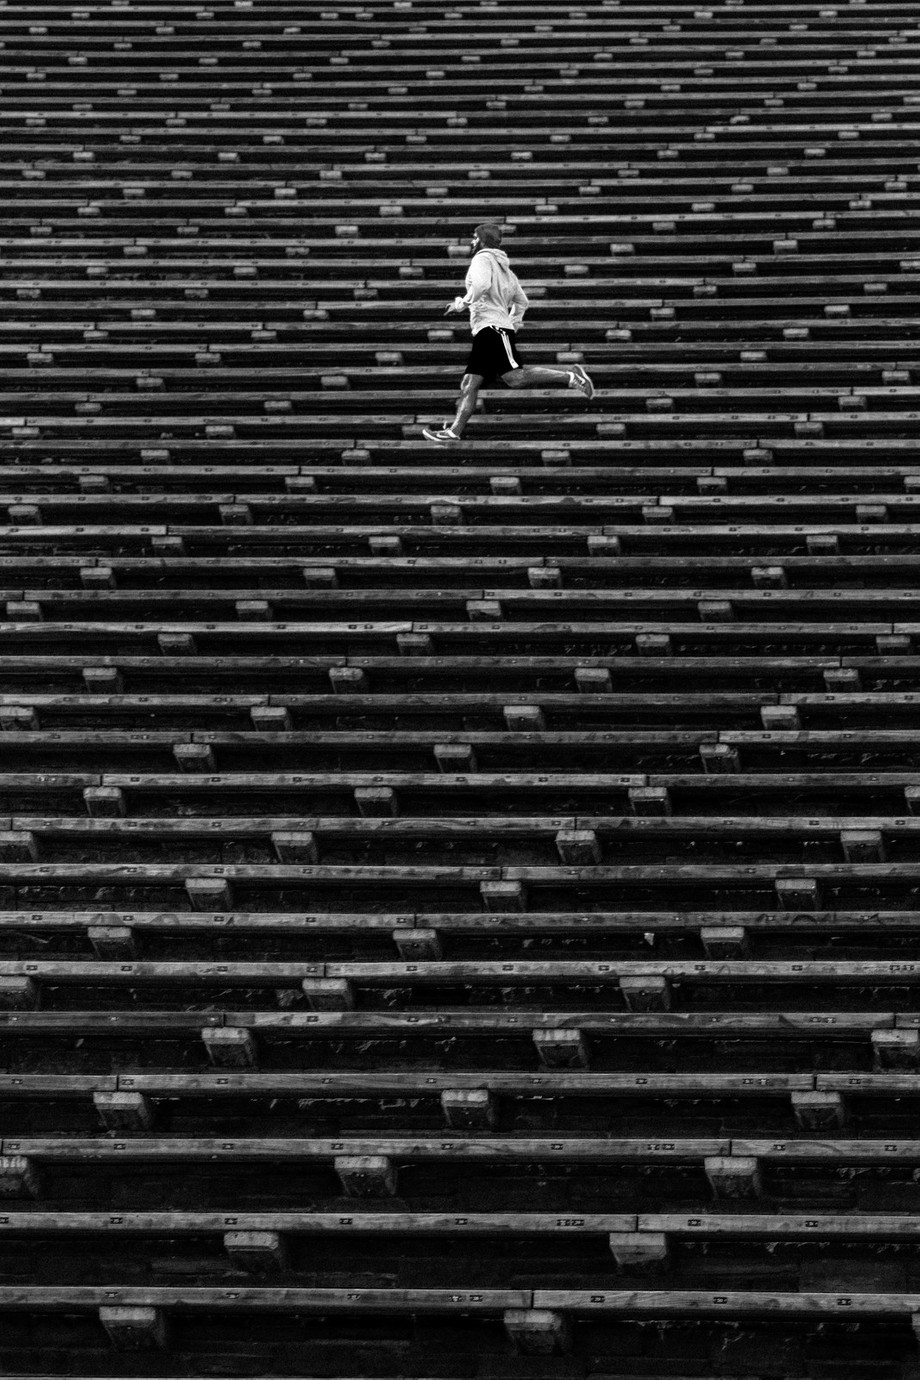 The Stair Master by KuriousG_12 - Diagonals And Composition Photo Contest